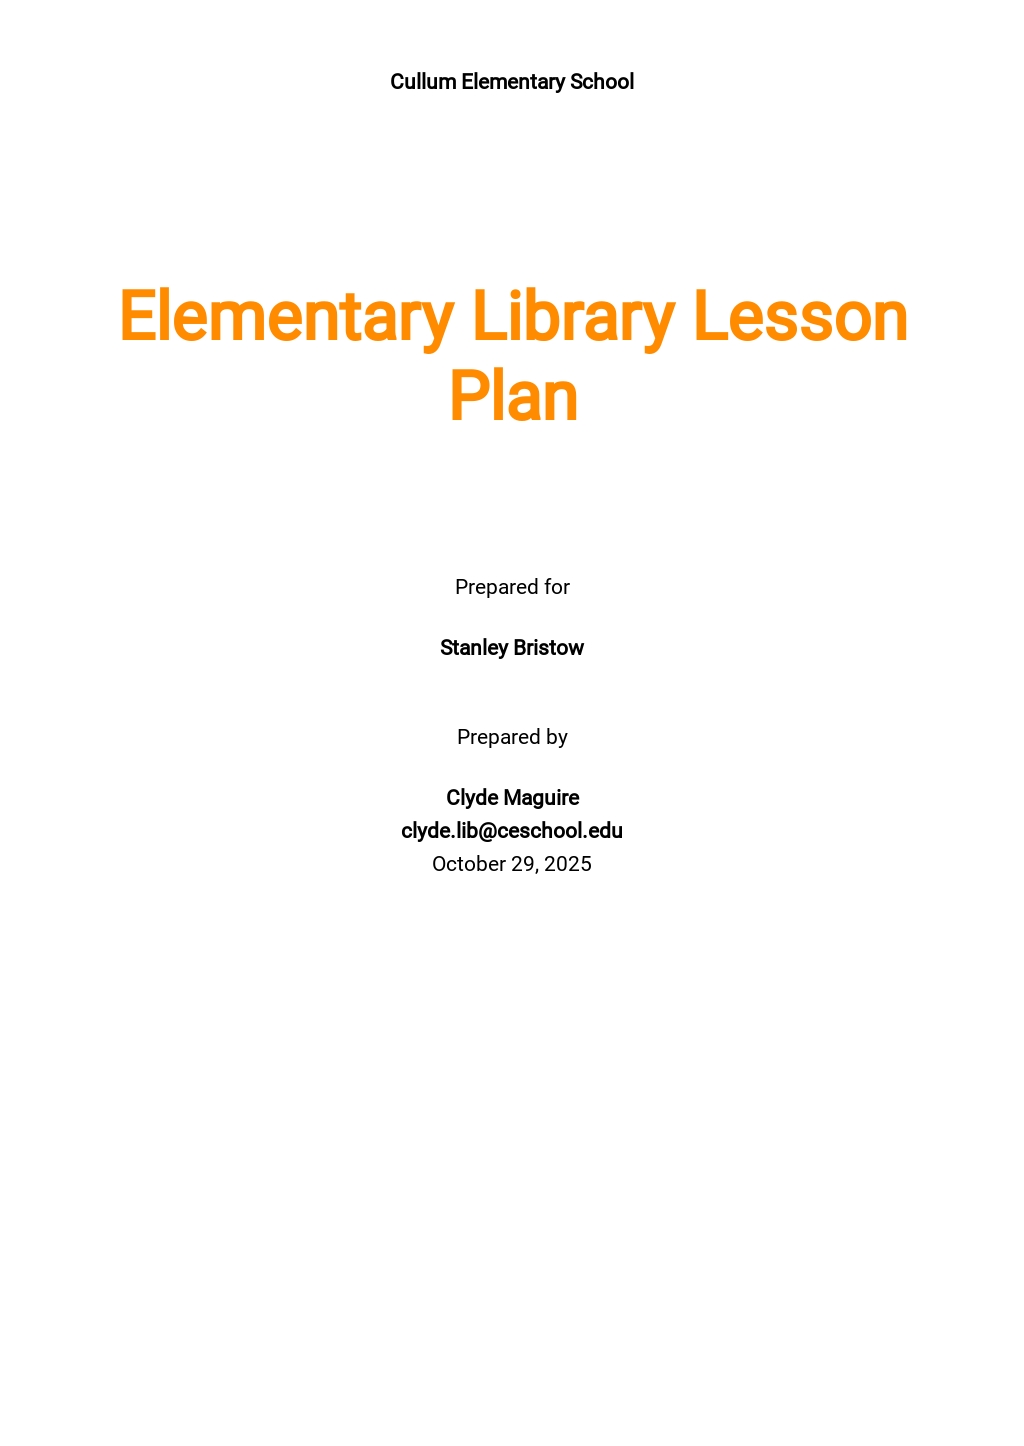 Elementary Library Lesson Plan Template.jpe